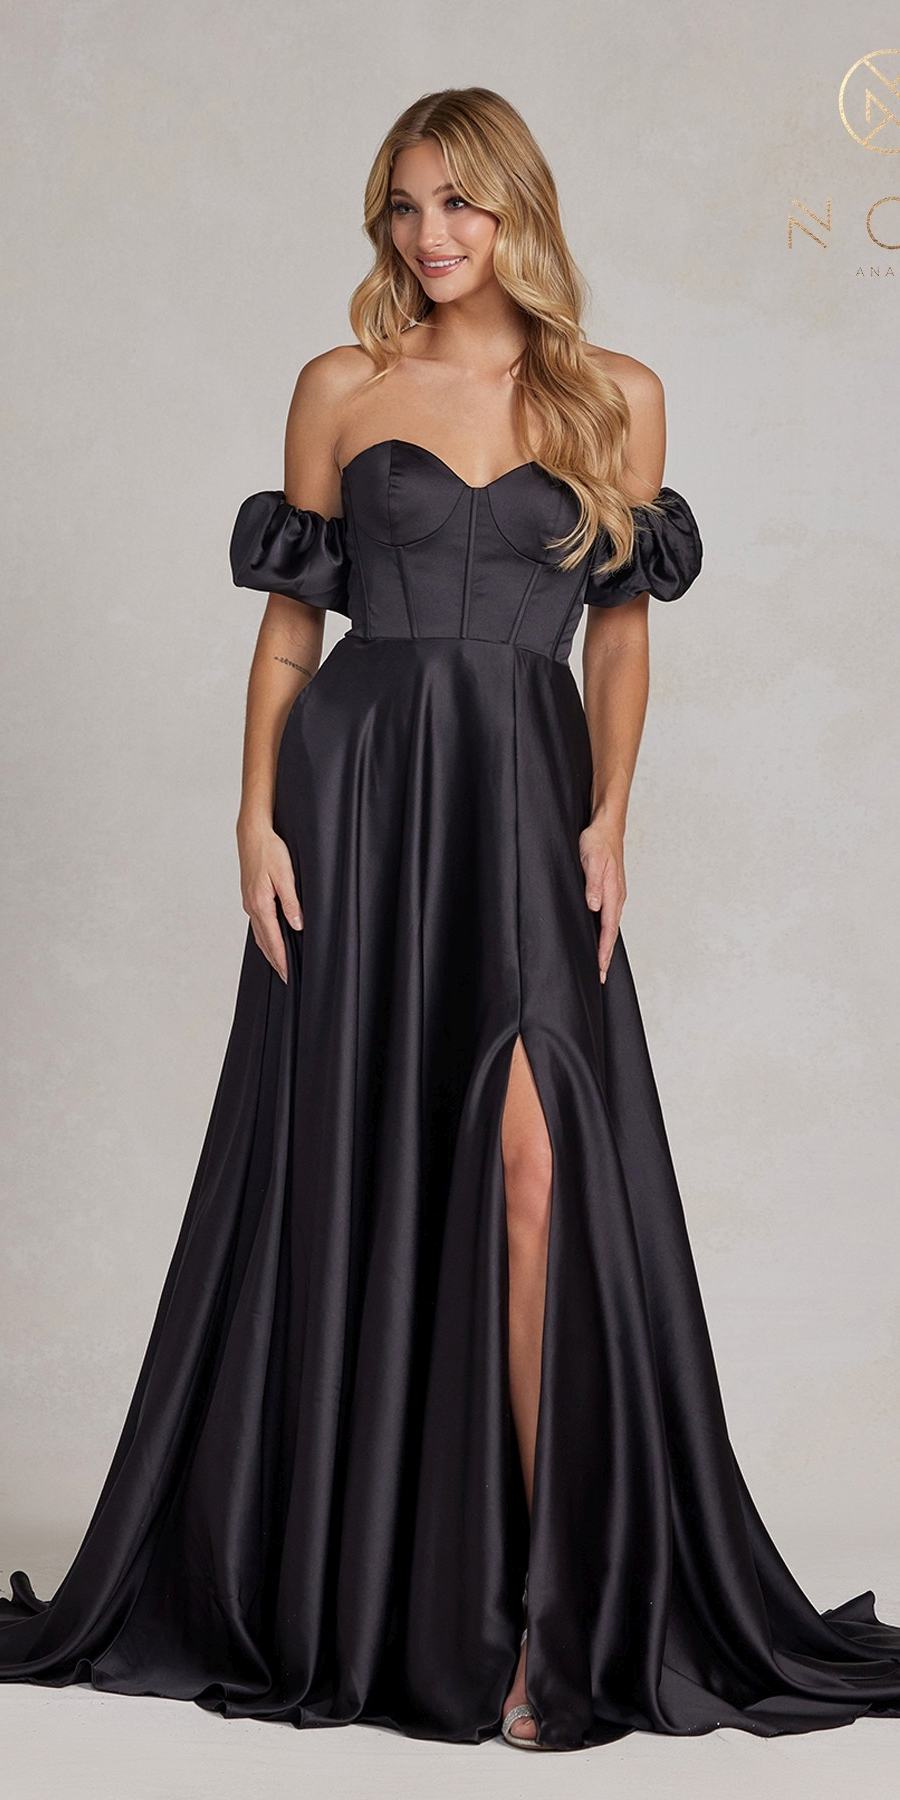 Nox Anabel K1122 Floor Length A-line Satin Gown with Detachable Puff  Sleeves - Black / 00